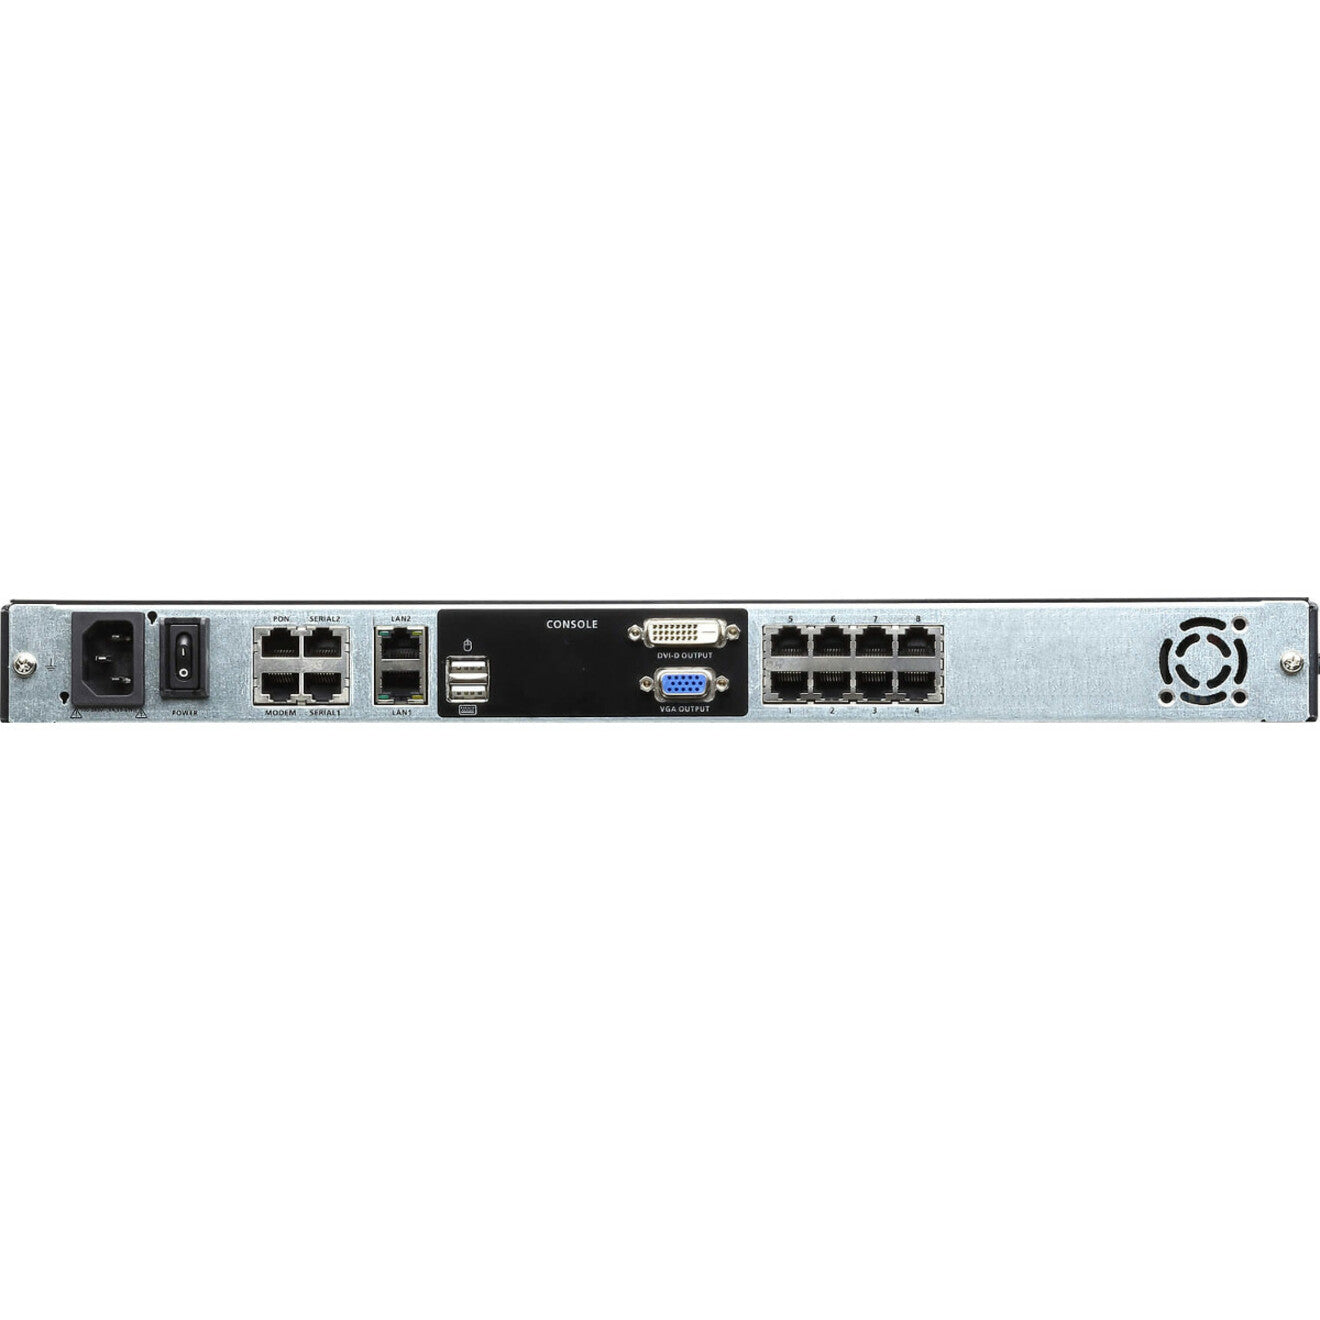 ATEN KL1108VN Cat 5 Dual Rail LCD KVM Over IP Switch With a Rack Mount Kit, 8-port 19inch FHD Remote and Local User